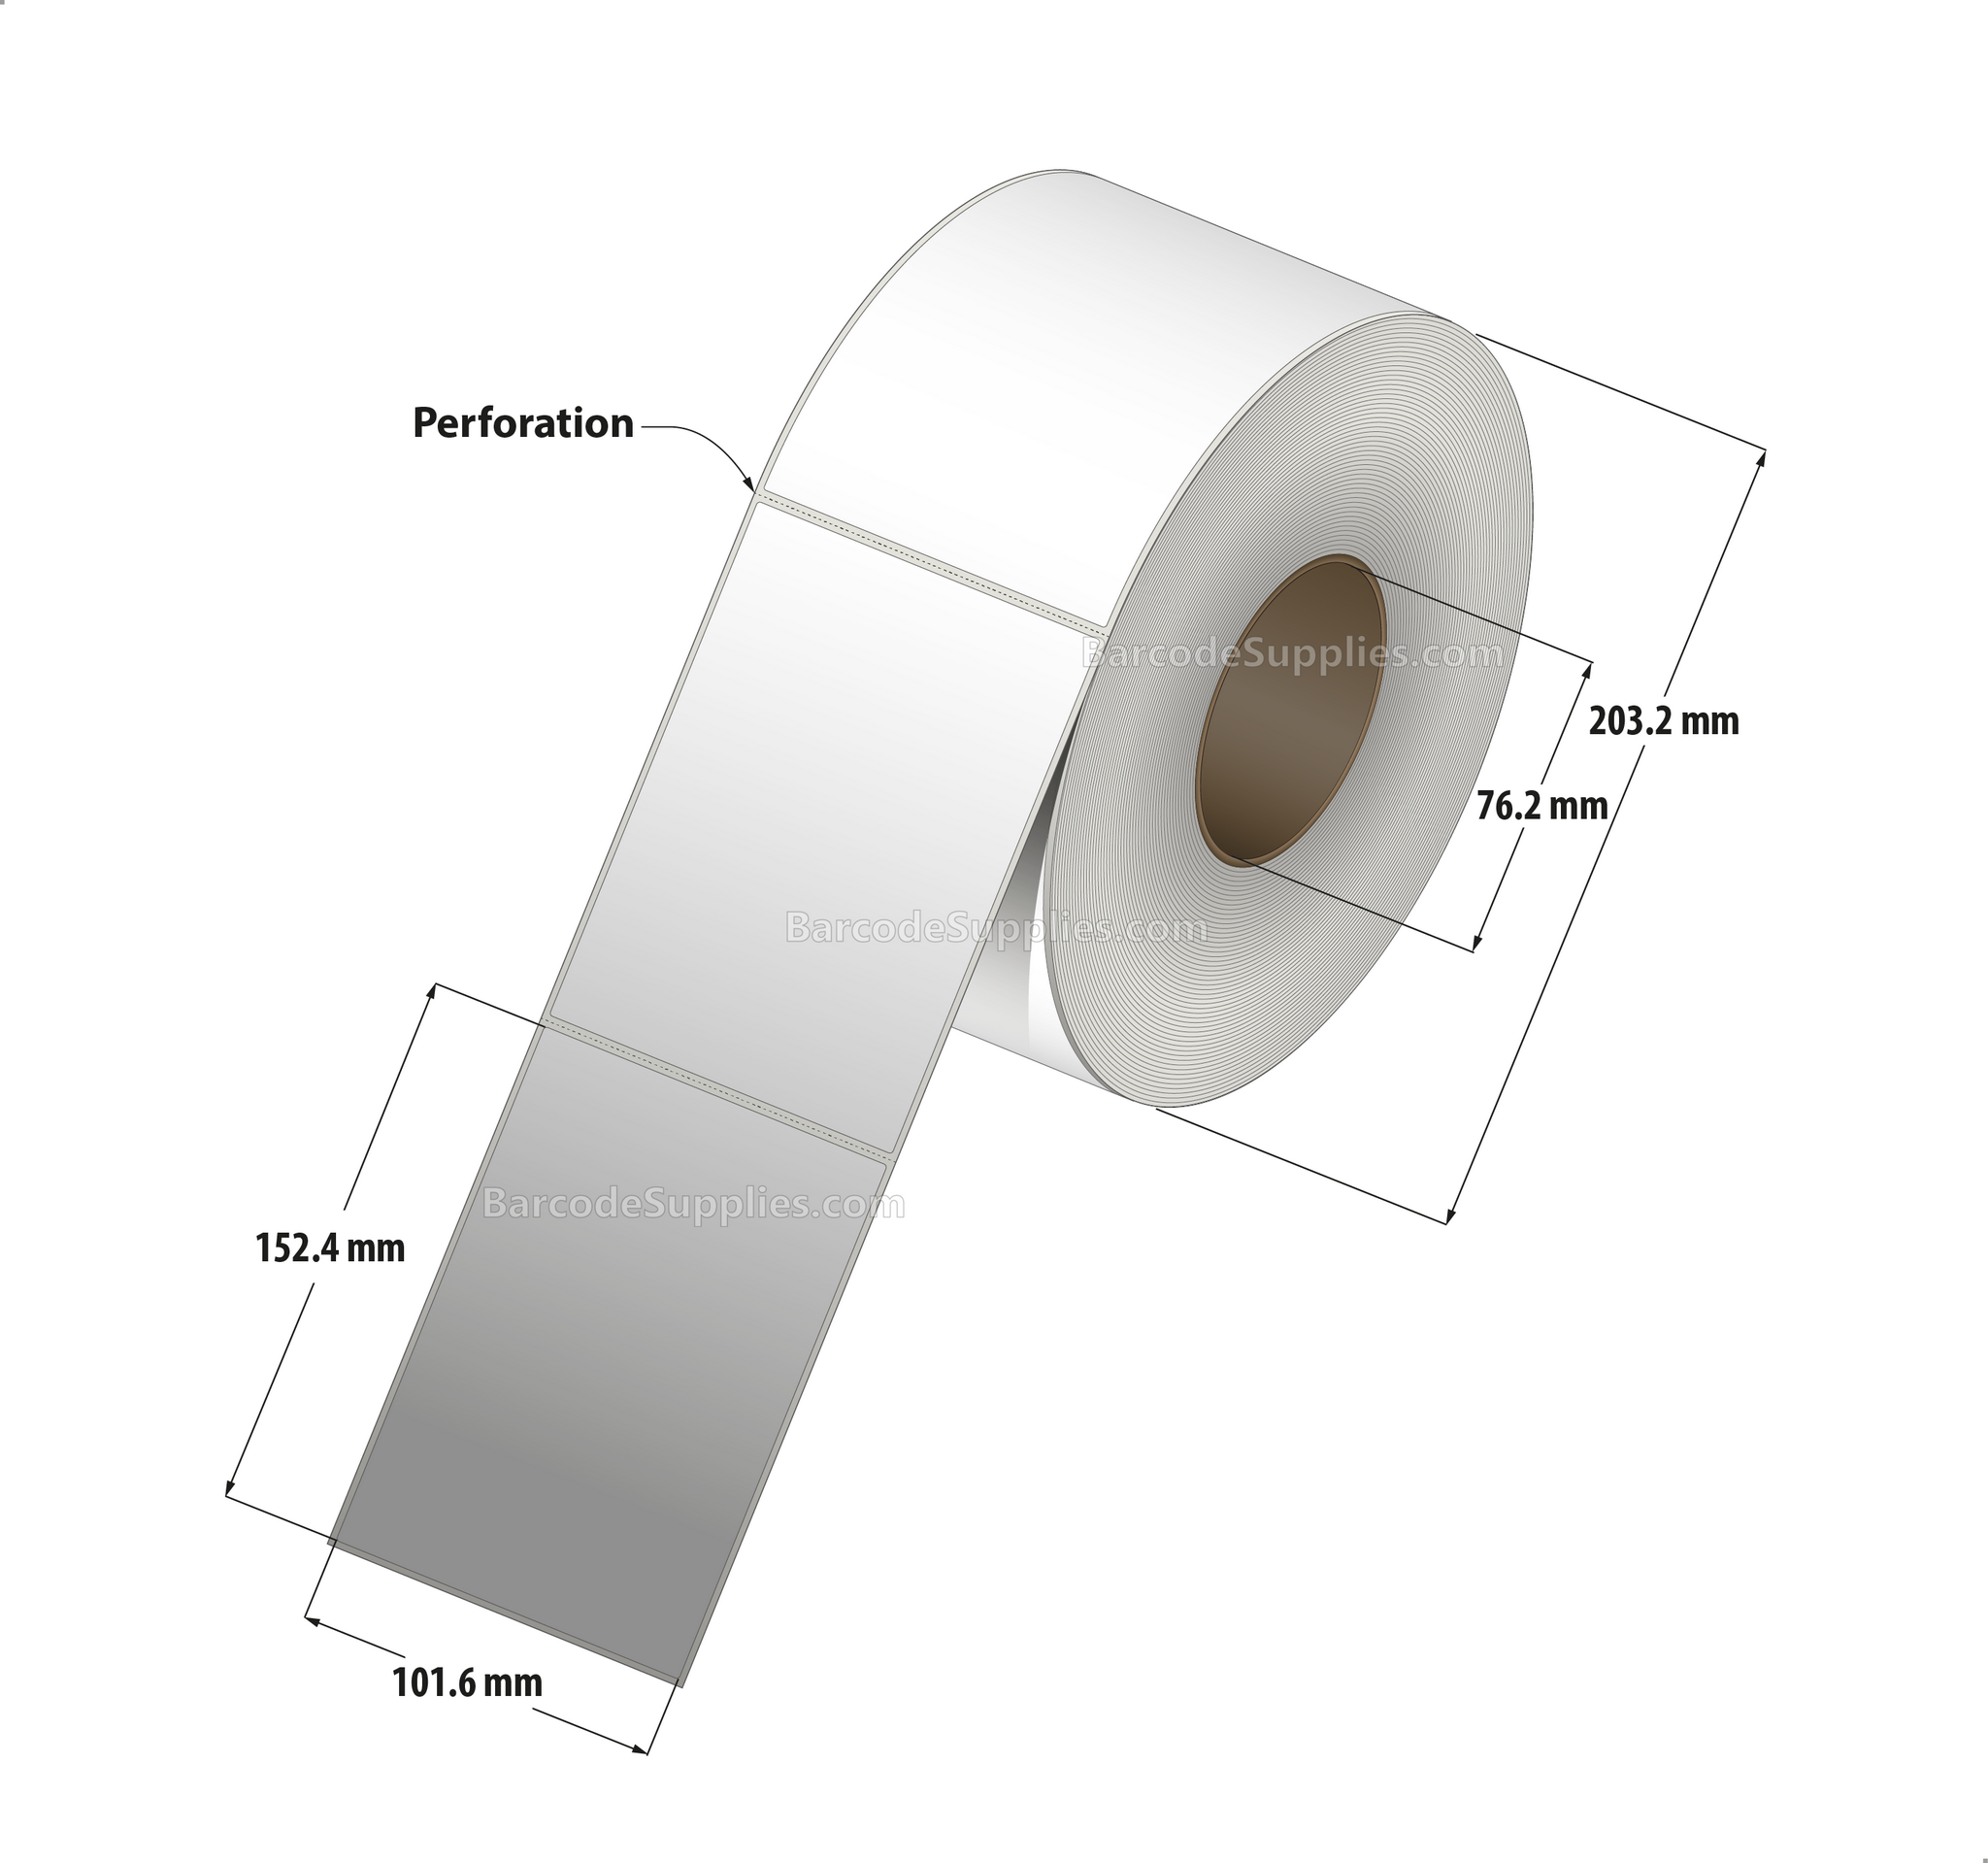 4 x 6 Thermal Transfer White Labels With Permanent Adhesive - Perforated - 950 Labels Per Roll - Carton Of 4 Rolls - 3800 Labels Total - MPN: RK-4-6-950-3